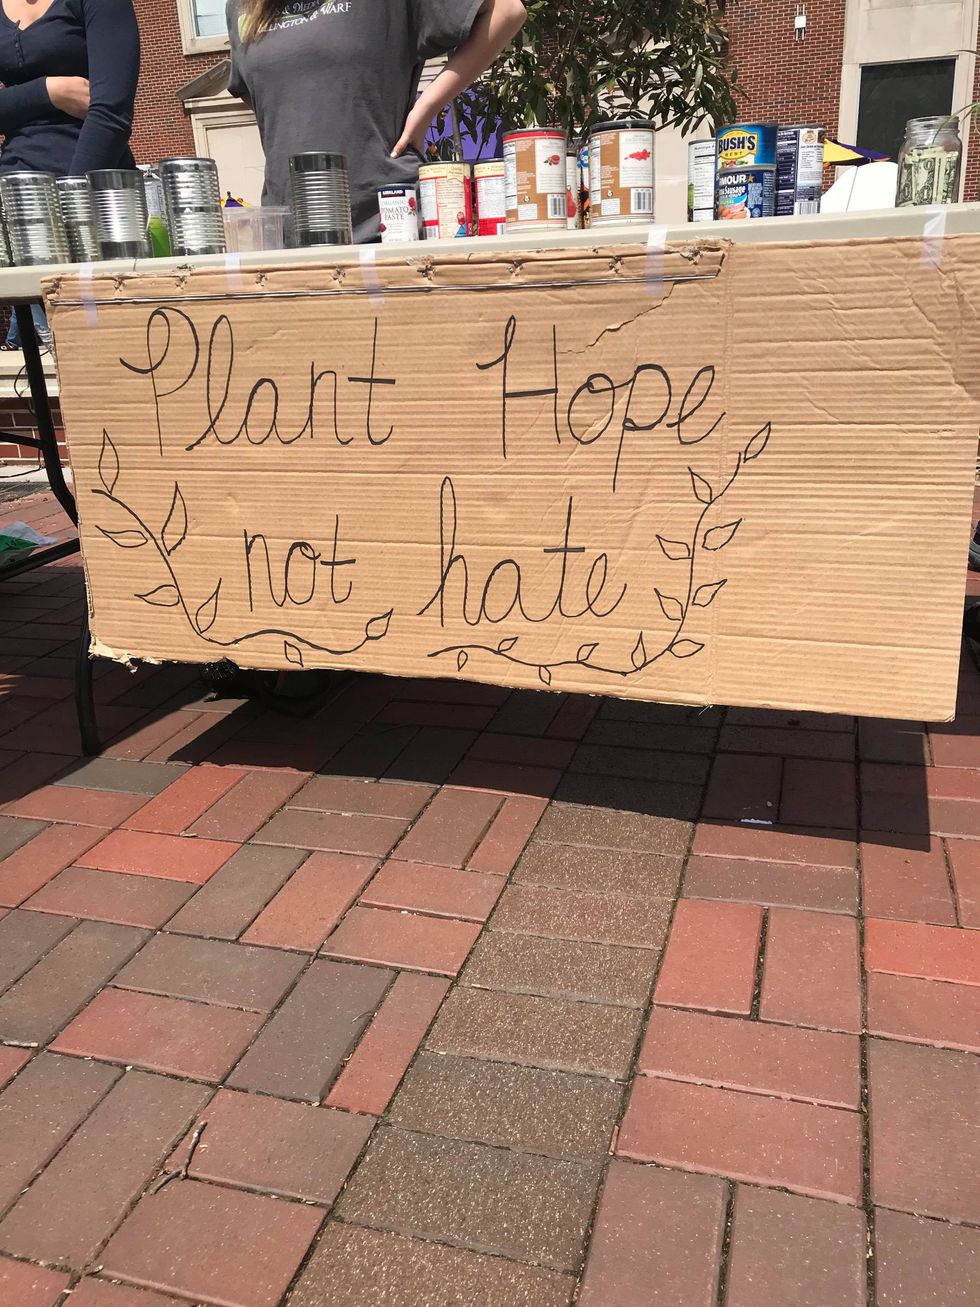 Planting Hope, Not Hate